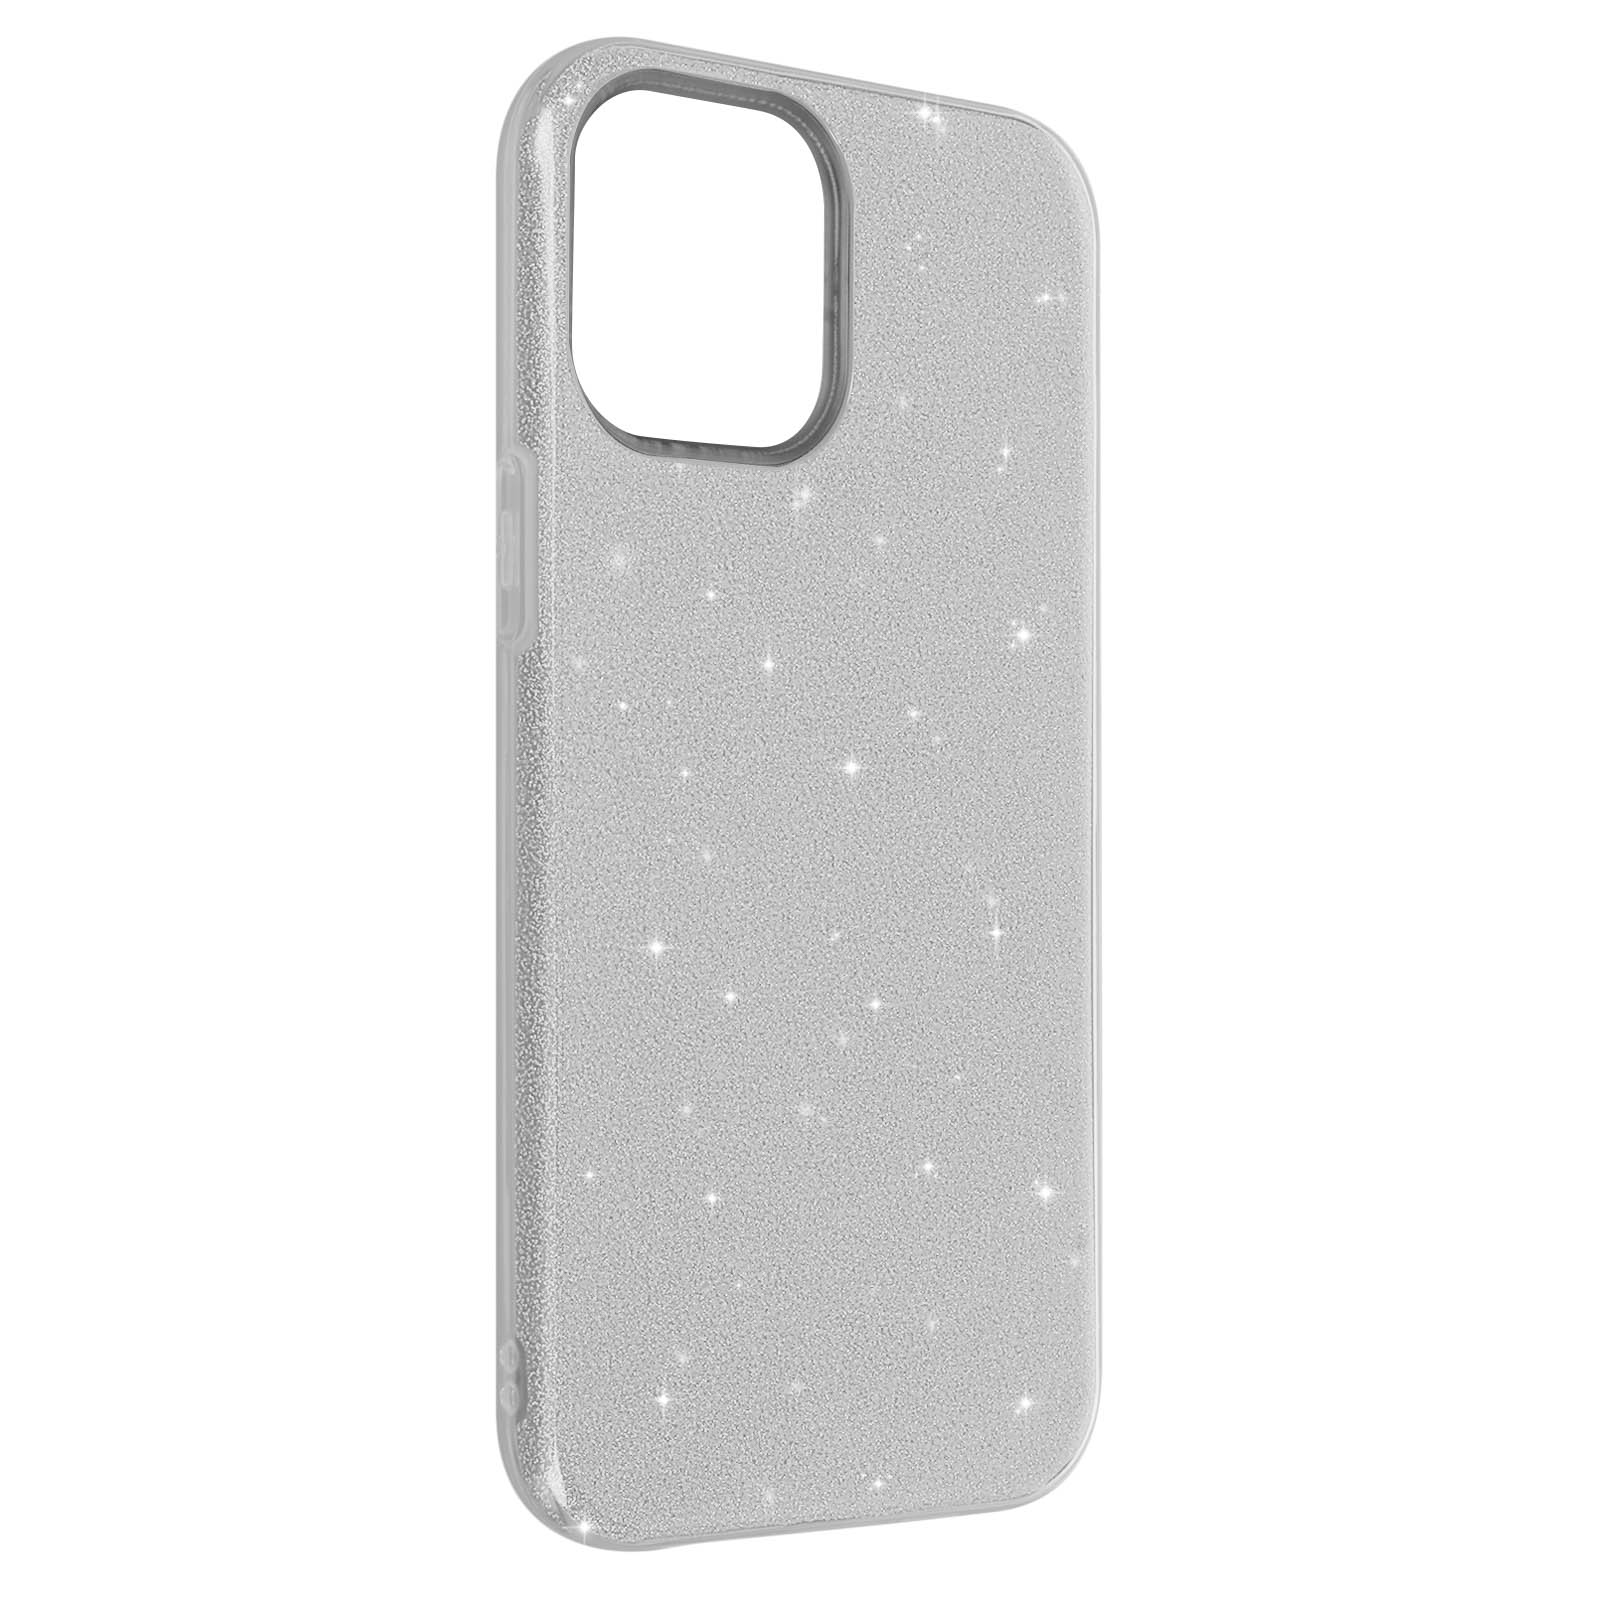 Apple, 12 Series, Pro iPhone Silber Max, Papay AVIZAR Backcover,